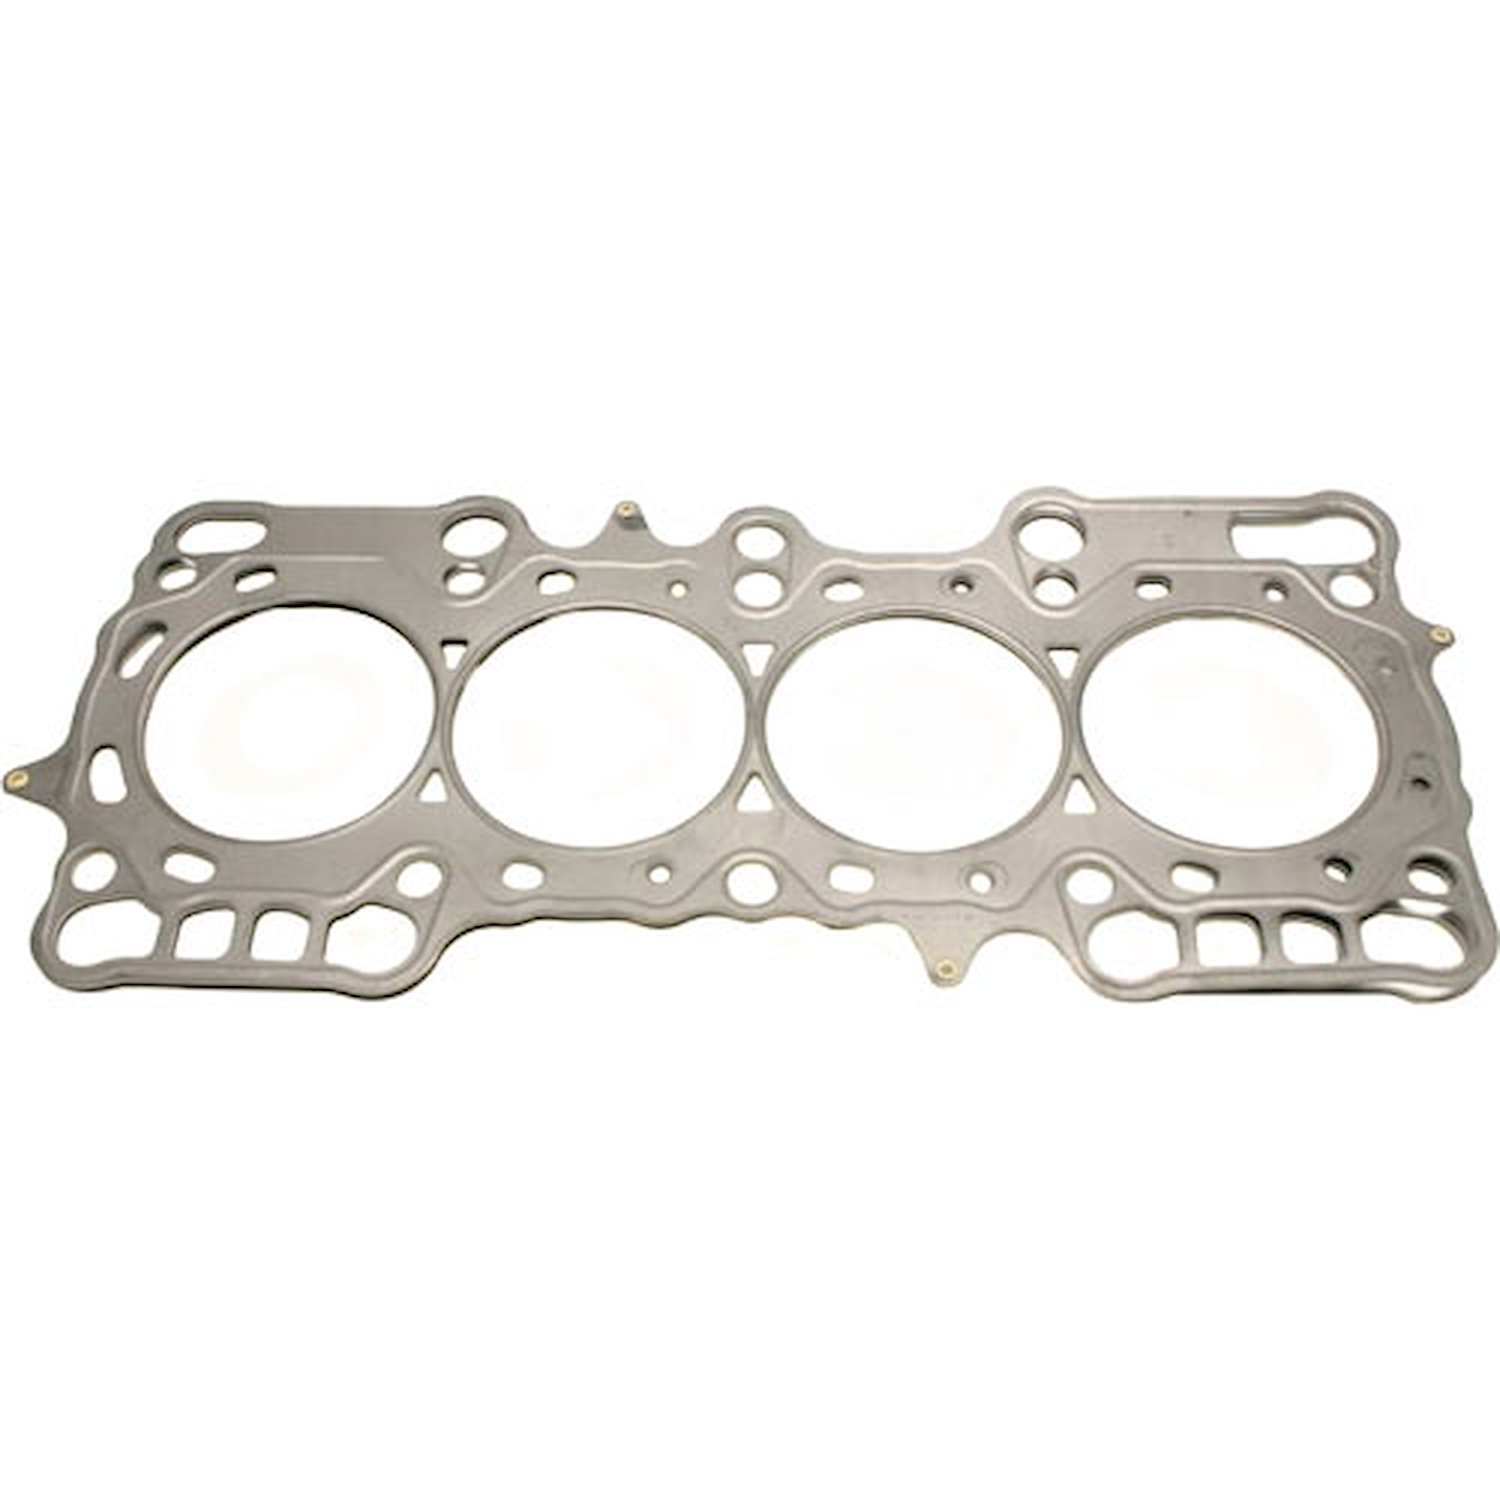 Head Gasket for 1993-1996 Honda Prelude with H22A1, H22A2 Engines [0.027 in.]